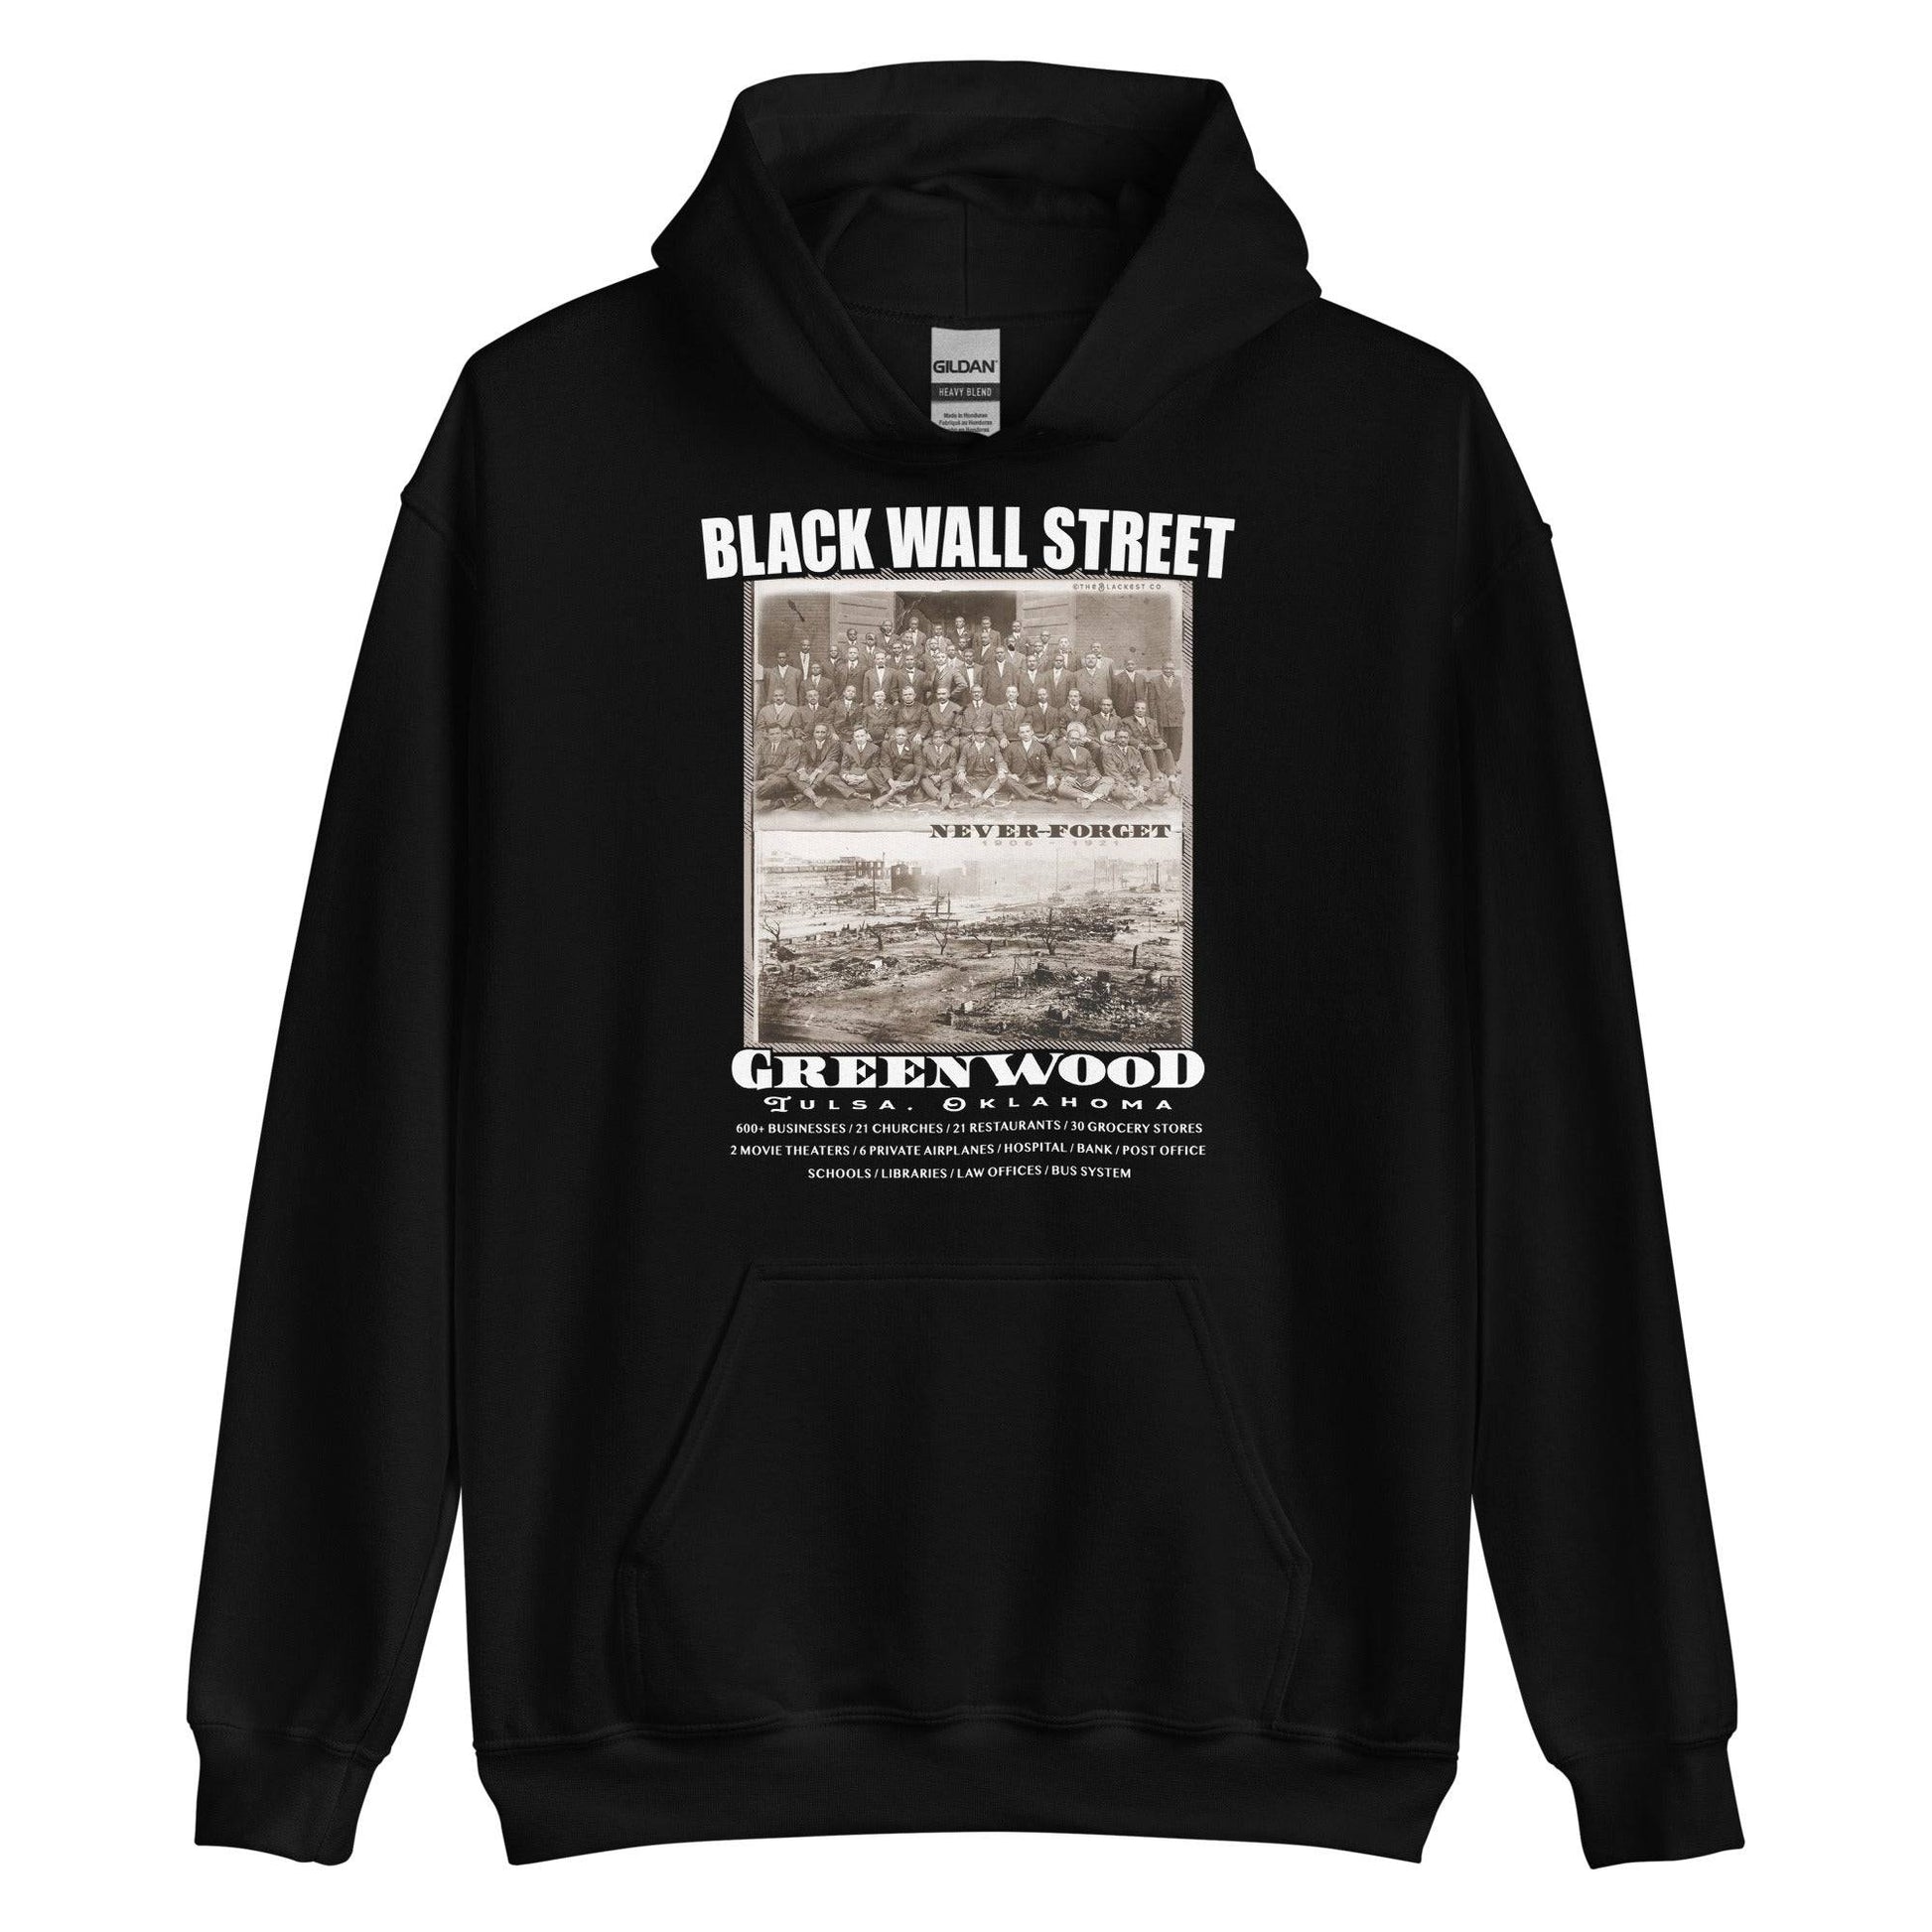 black pullover hoodie with writing that says Black Wall Street and Greenwood